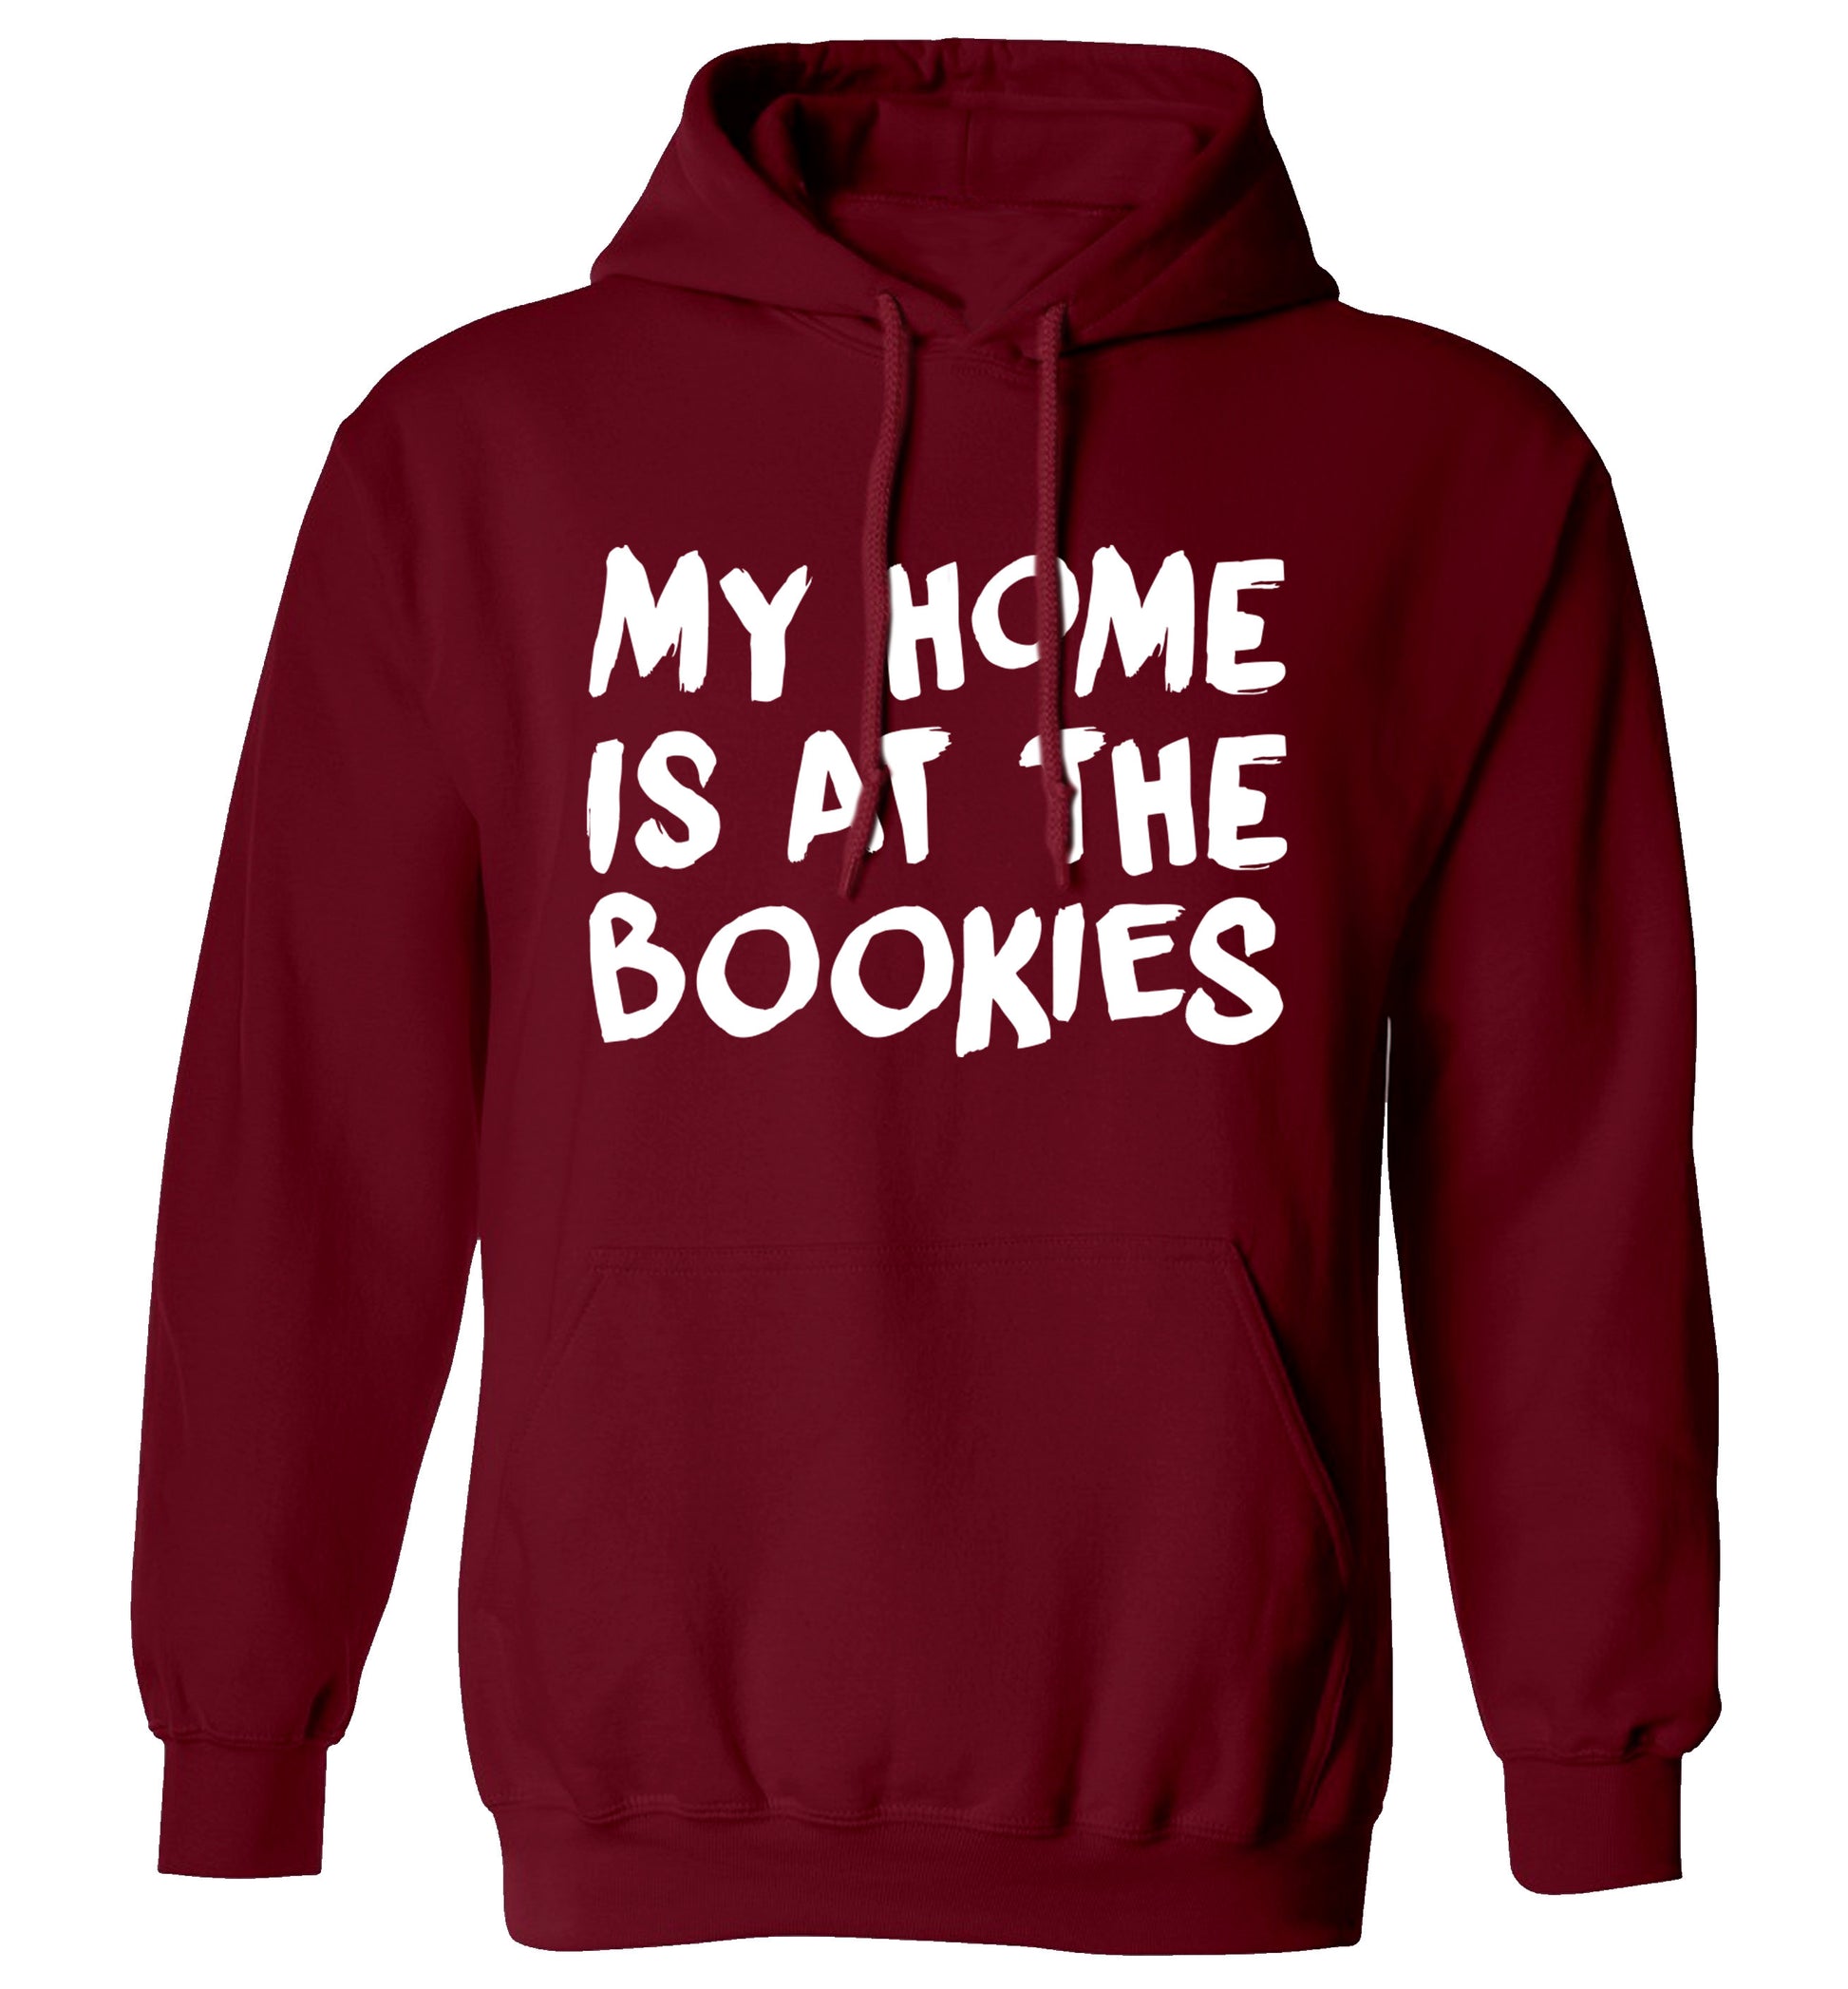 My home is at the bookies adults unisex maroon hoodie 2XL